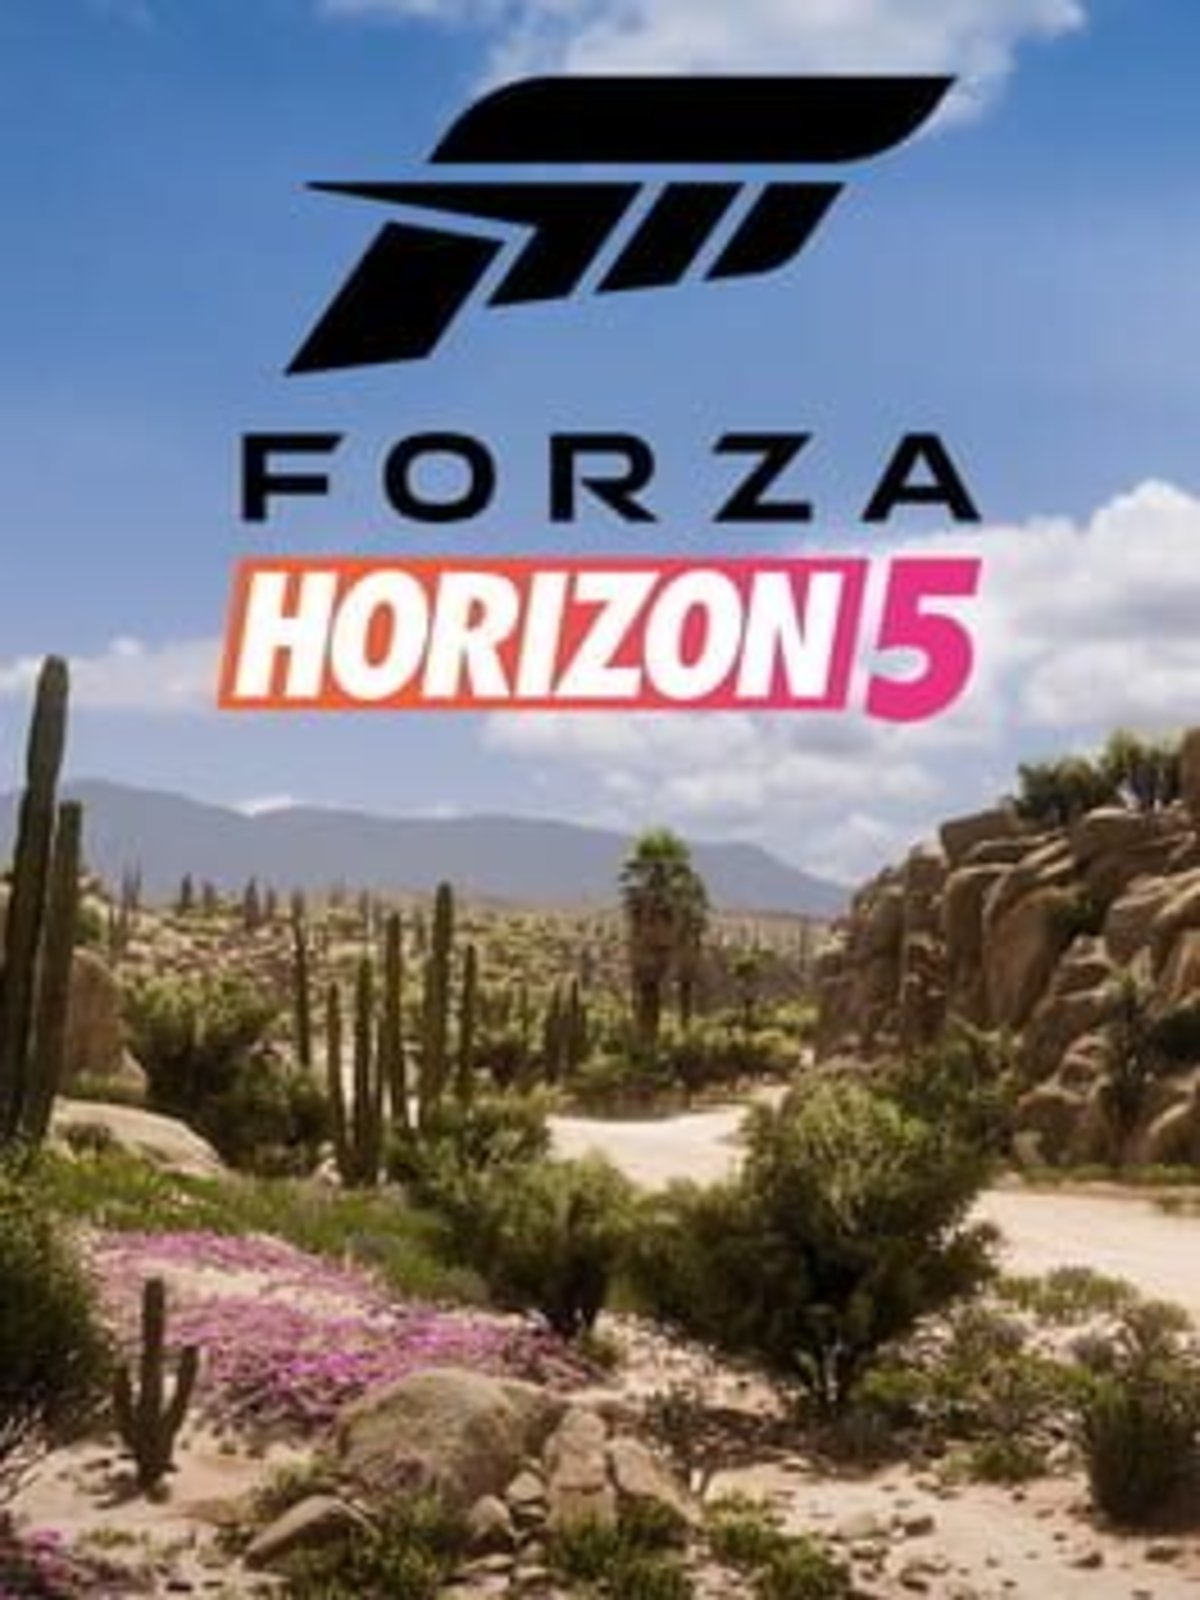 These 15 minutes of Forza Horizon 5 in 4K are the best you'll see today